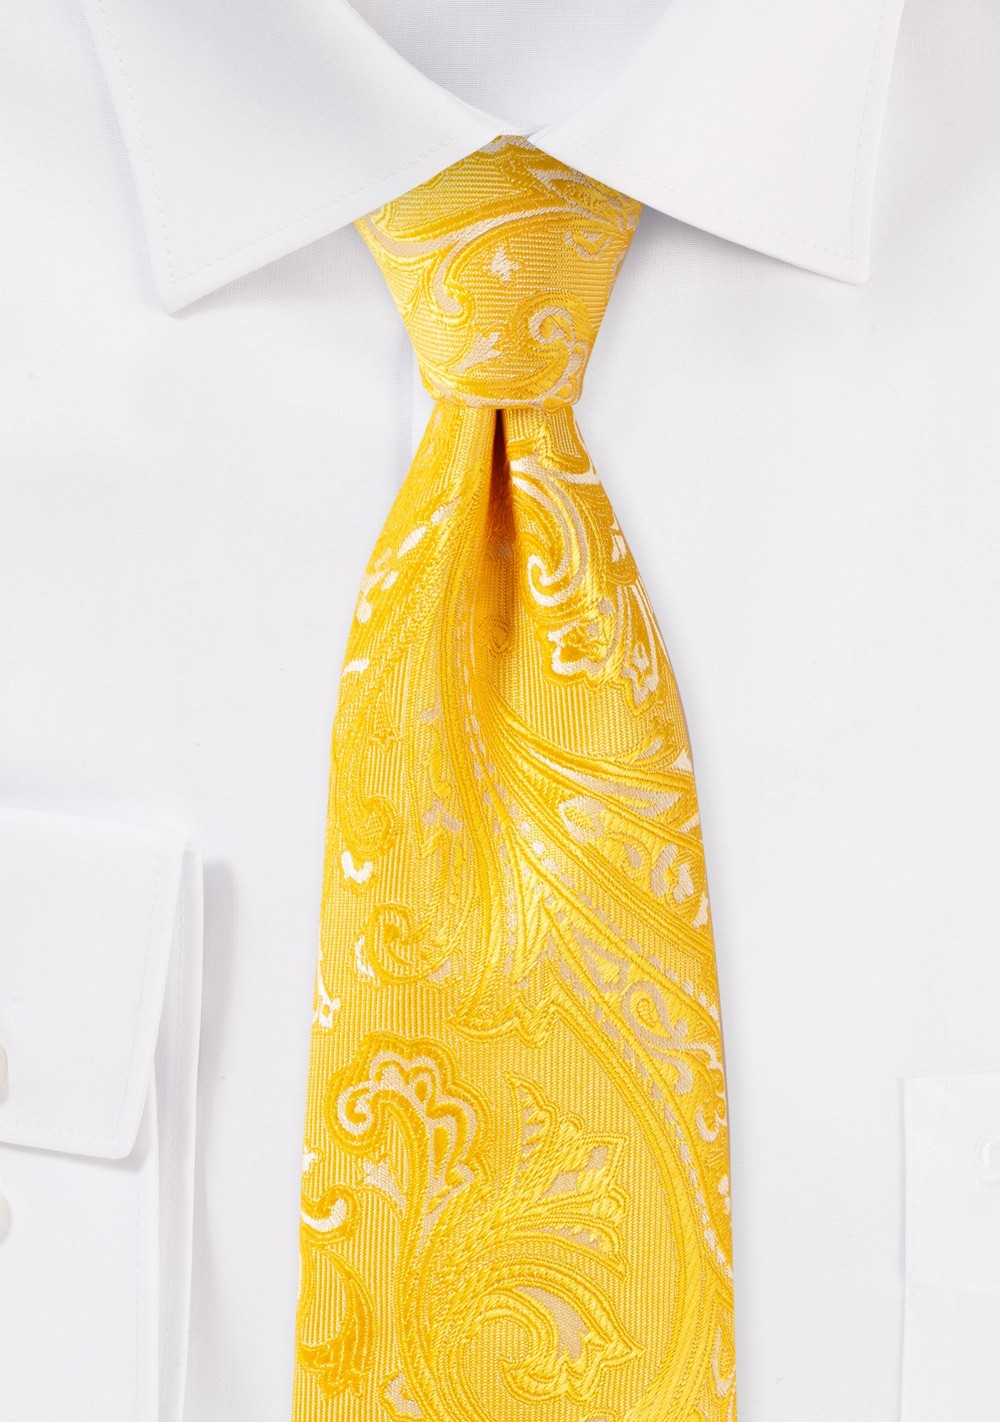 Canary Yellow Mens Paisley Tie in XL